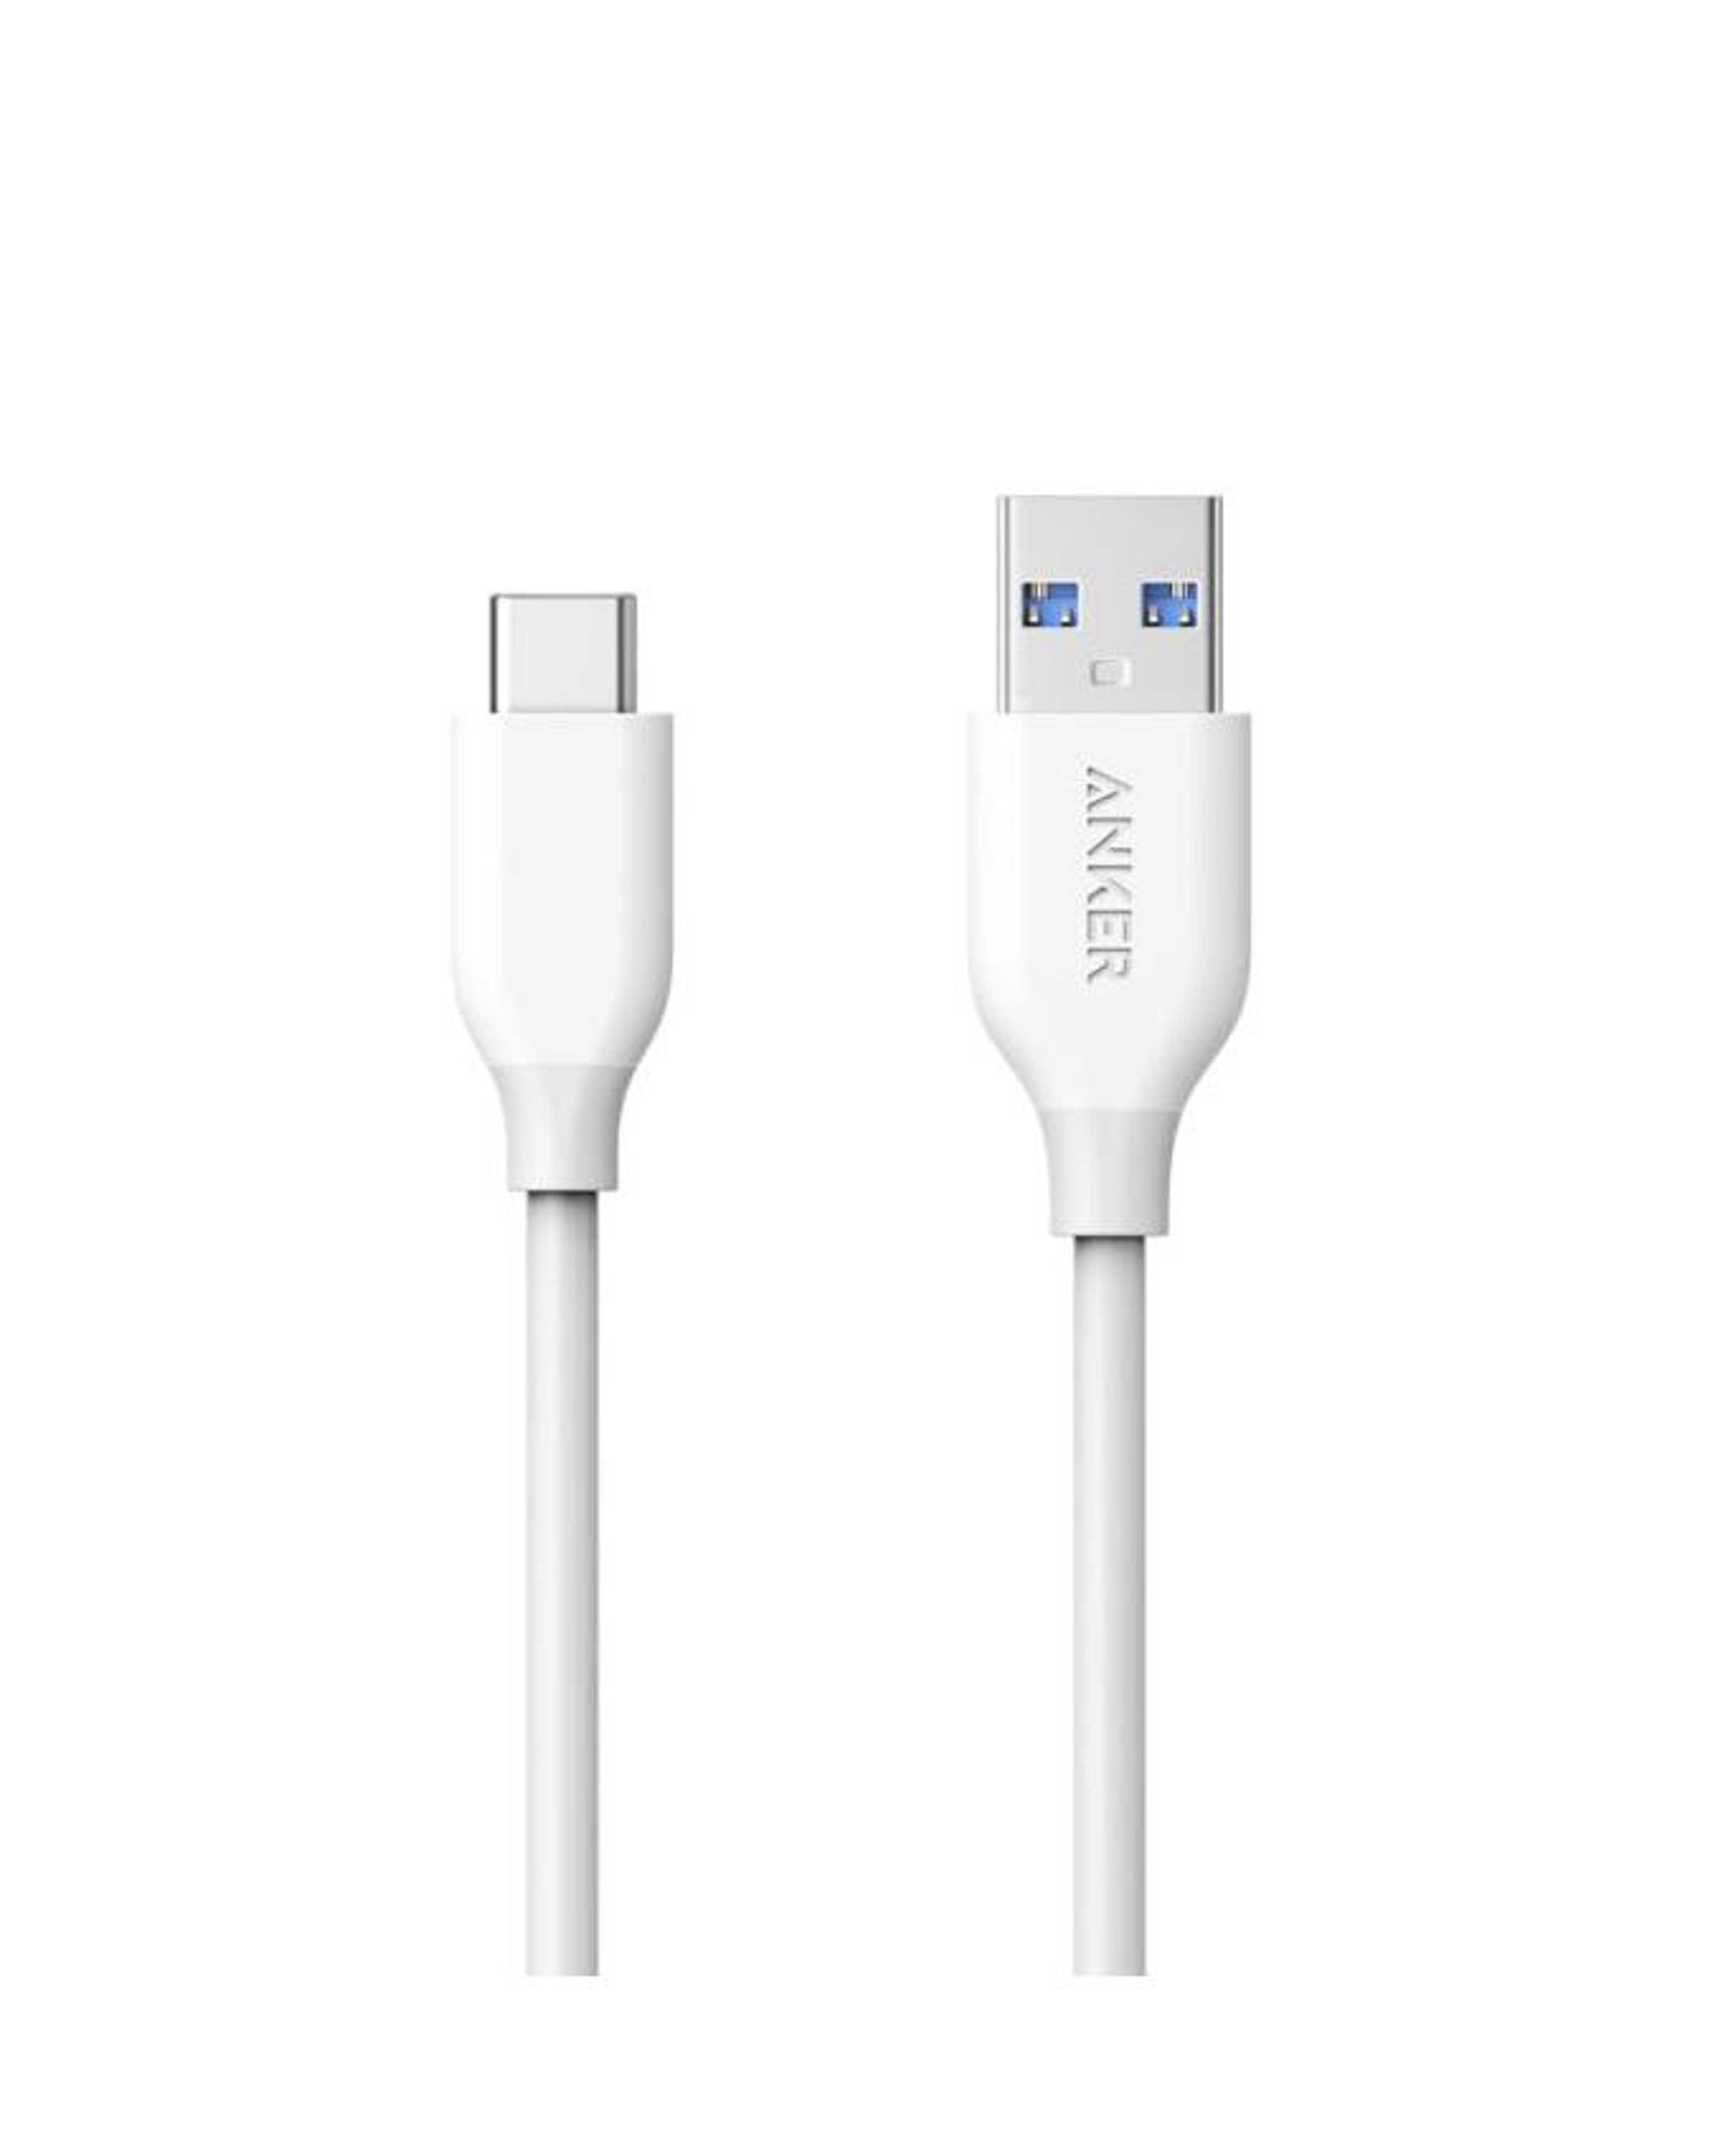 Anker A8163H21 - PowerLine USB-C to USB-A Cable 3ft